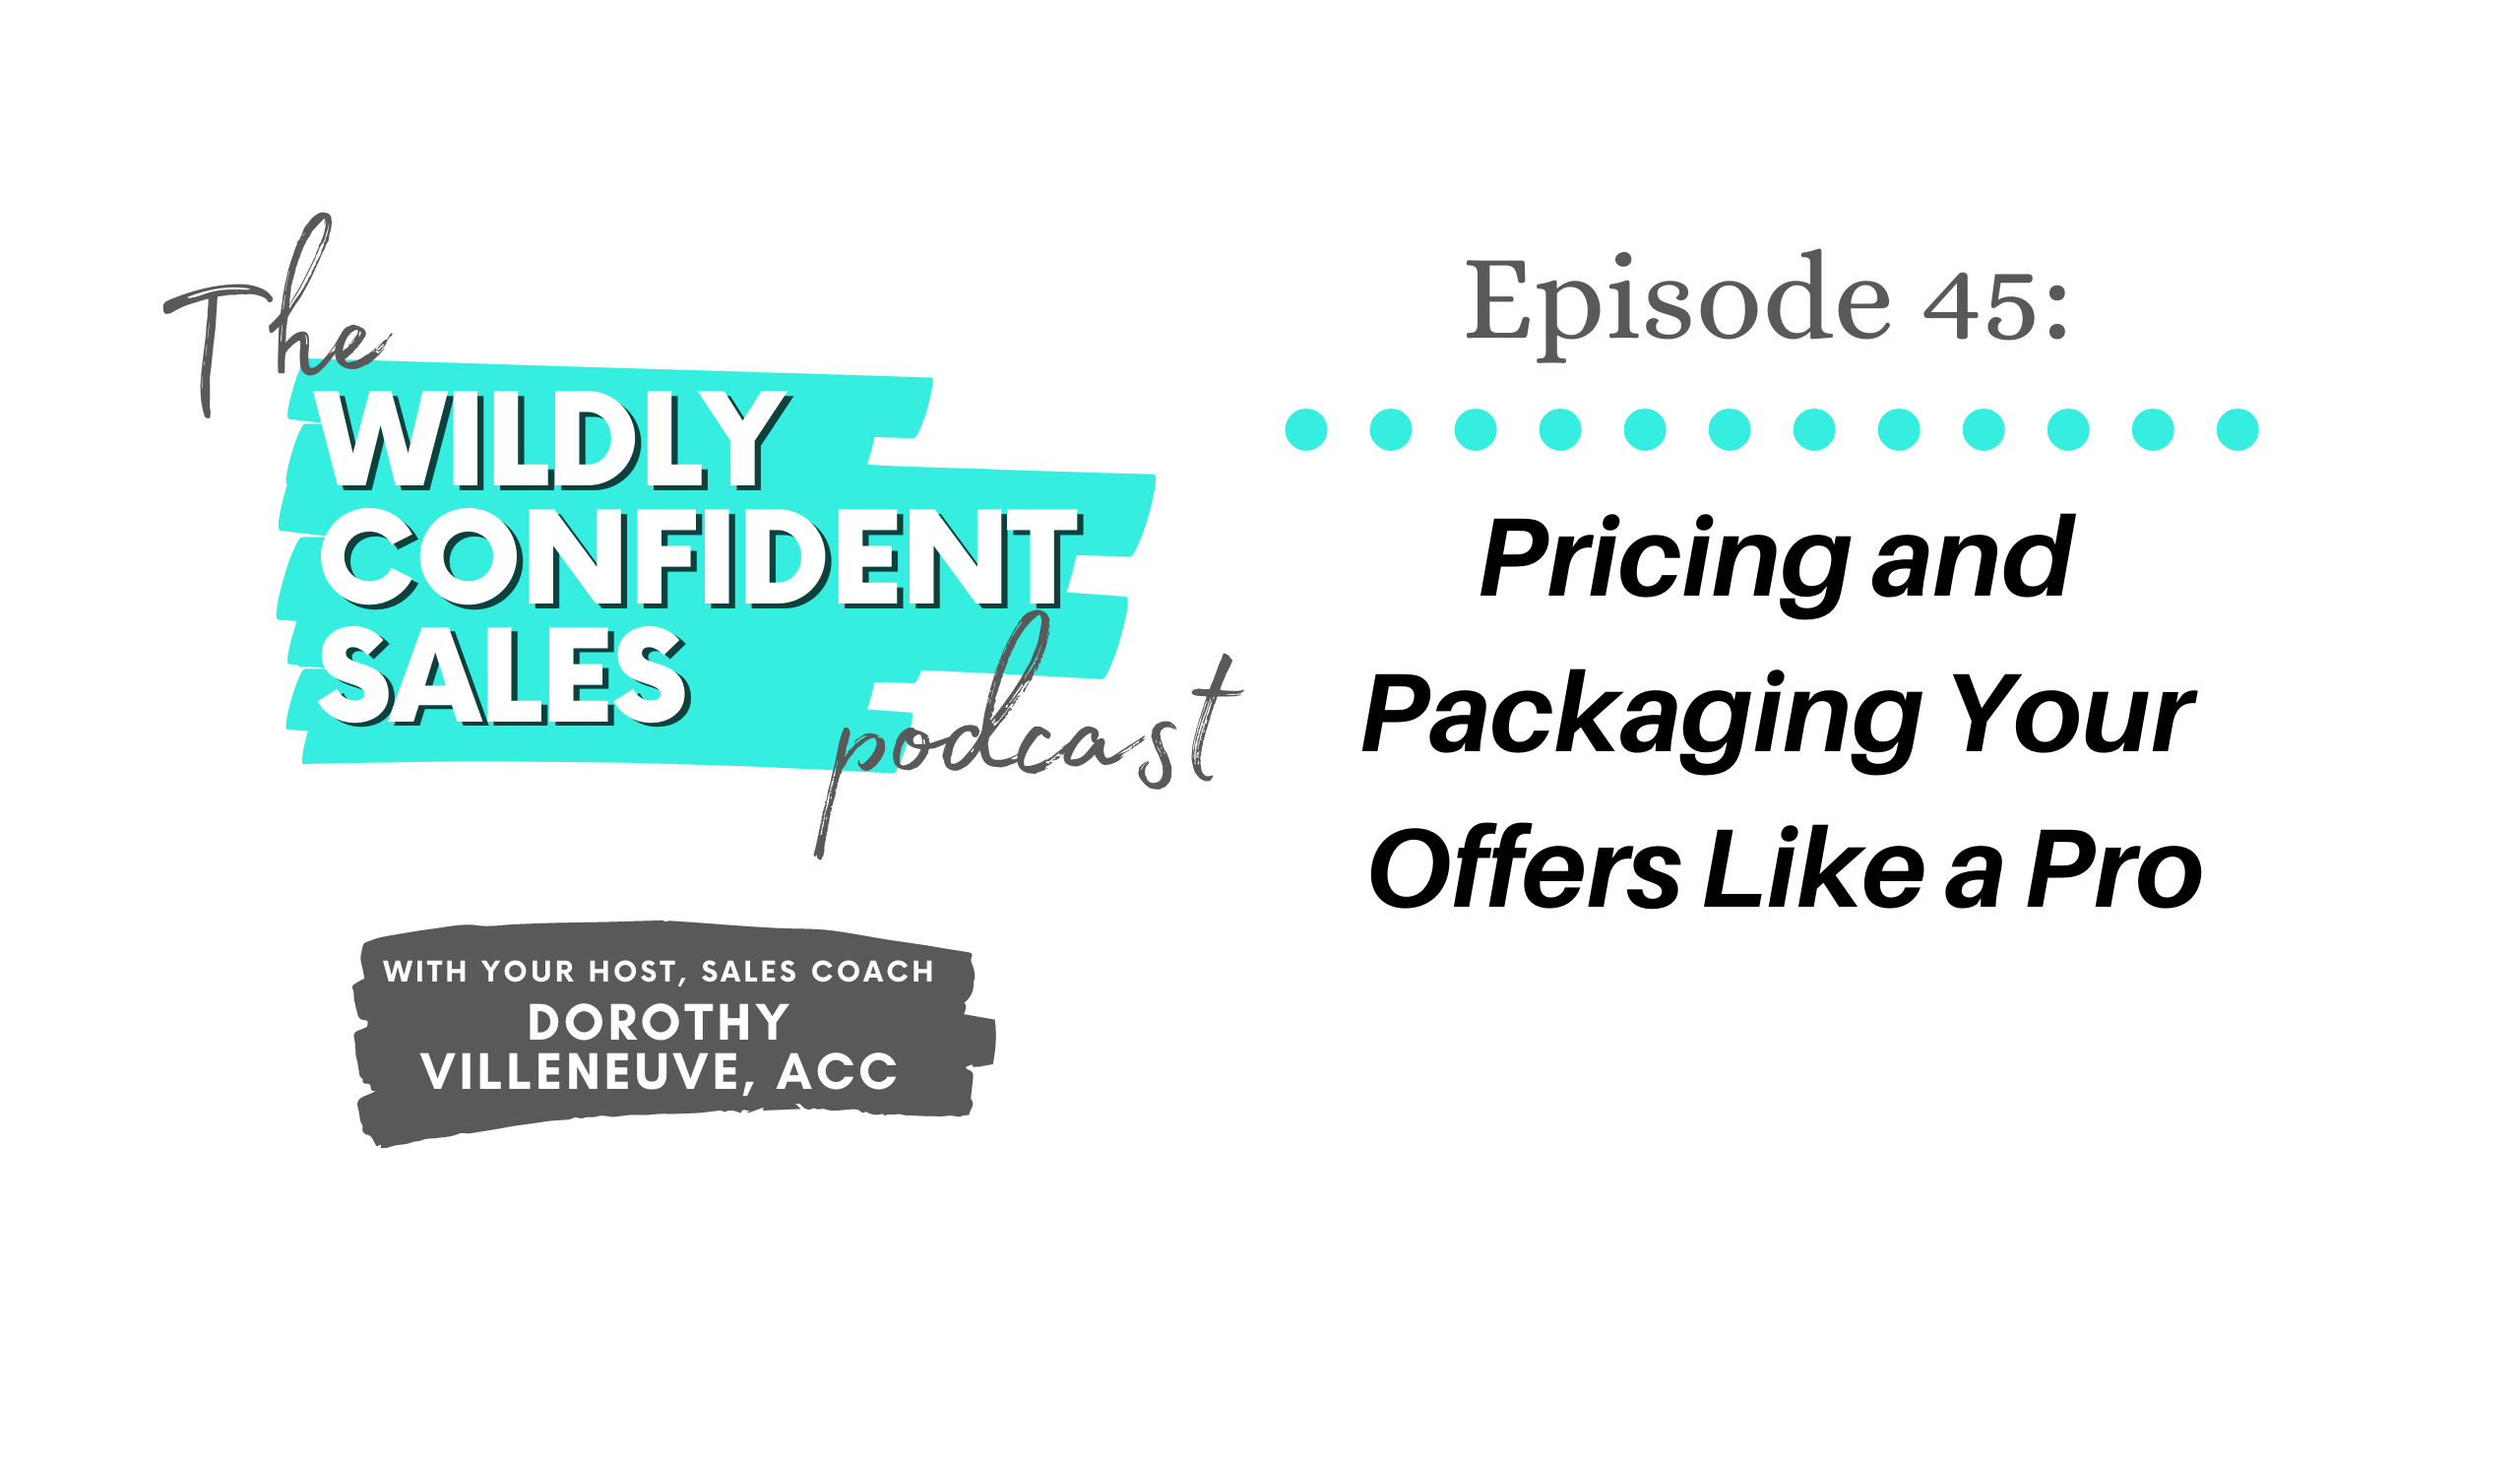 Pricing and Packaging Your Offers Like a Pro